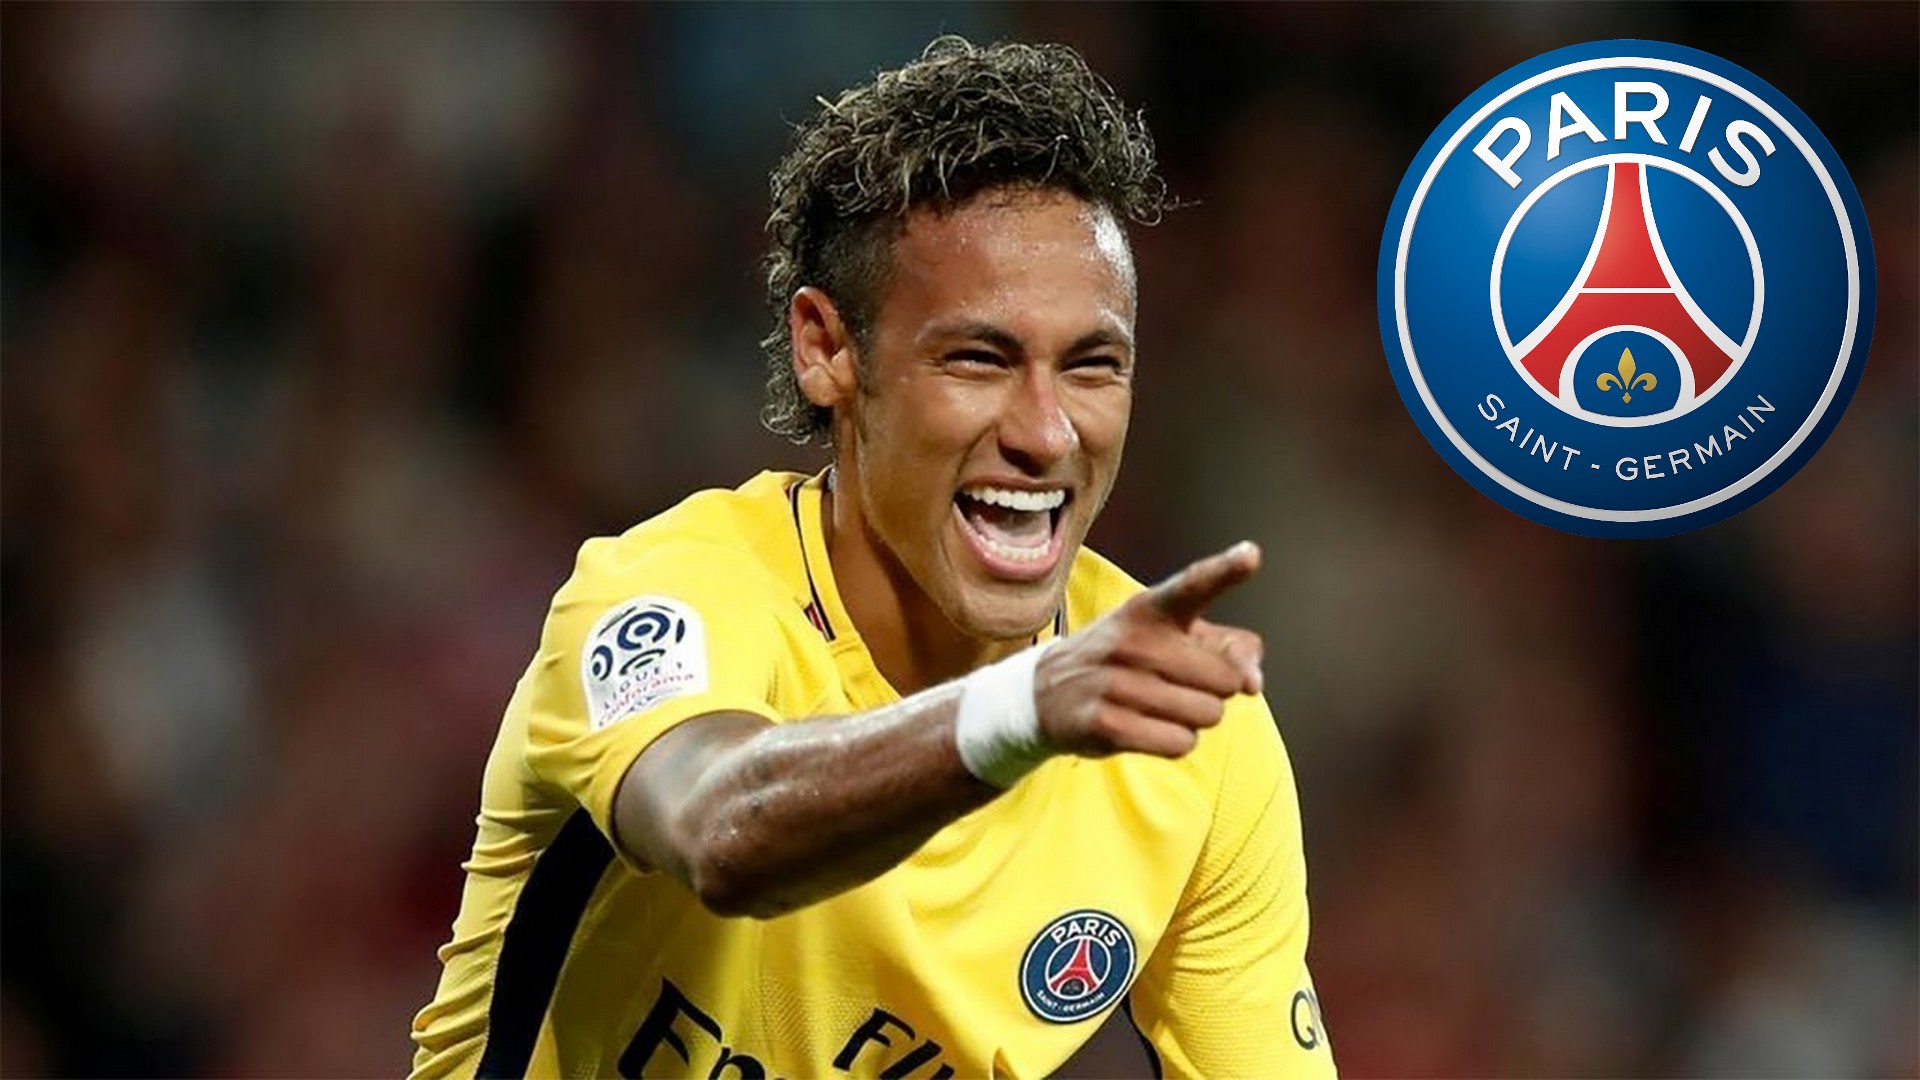 Wallpapers HD Neymar PSG With Resolution 1920X1080 pixel. You can make this wallpaper for your Mac or Windows Desktop Background, iPhone, Android or Tablet and another Smartphone device for free